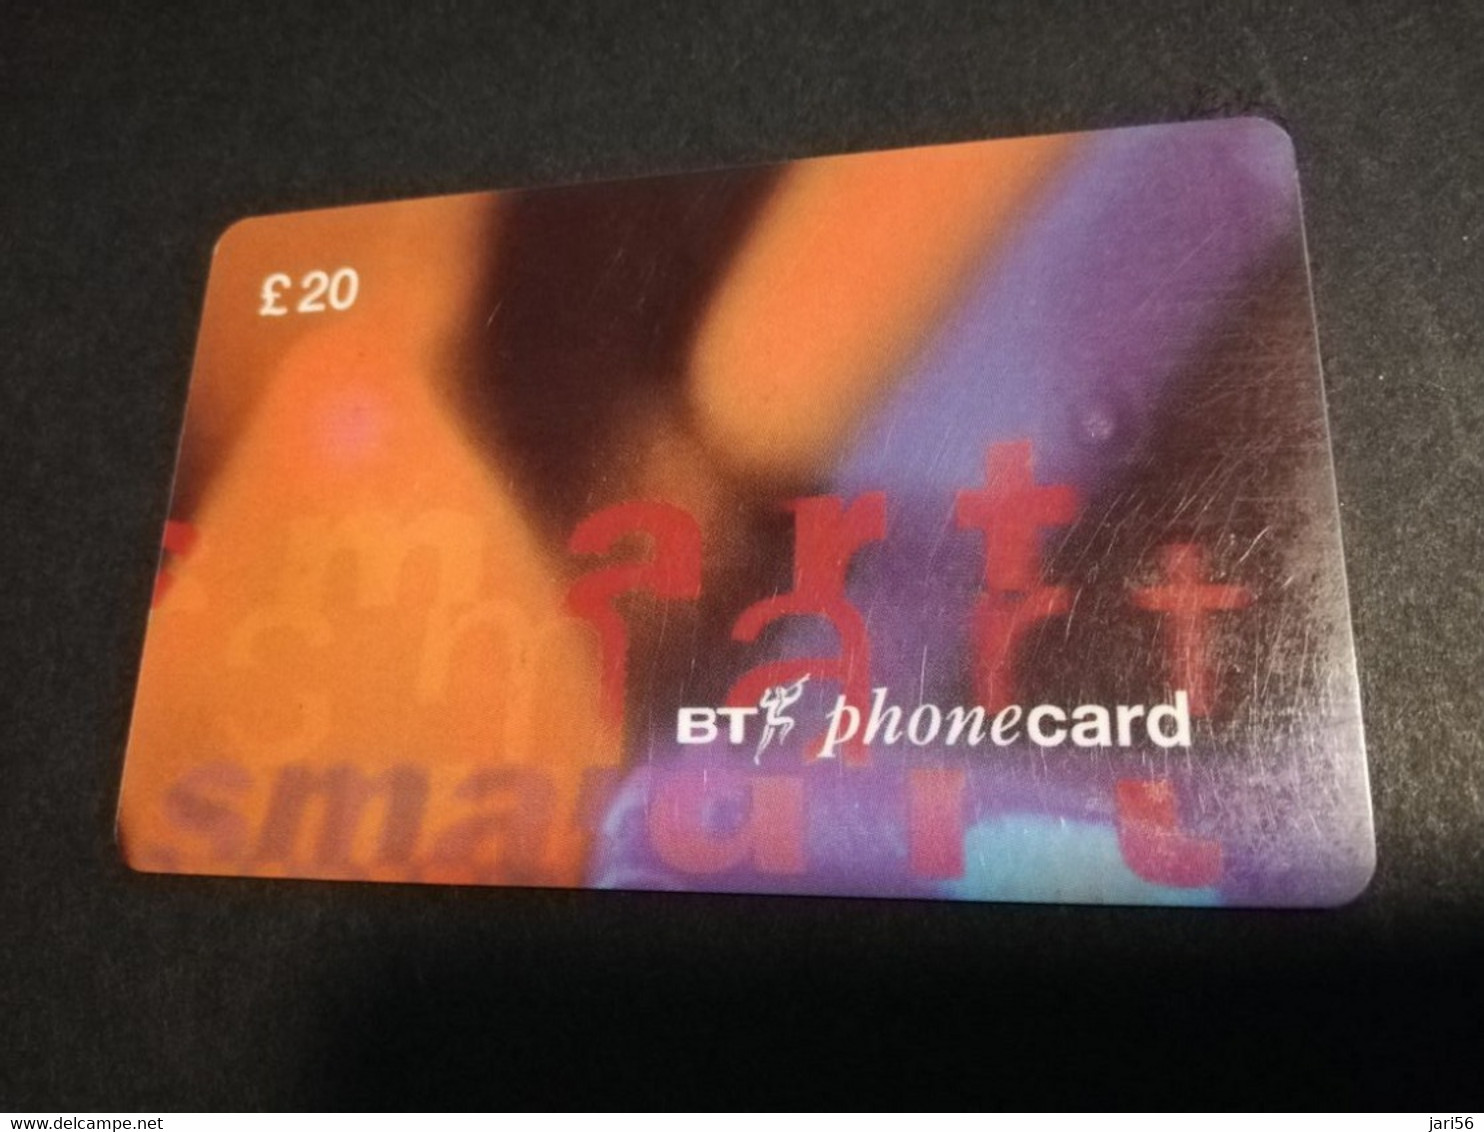 GREAT BRETAGNE  CHIPCARDS / TEST CARD 20 POUND    EXPIRY DATE 09/97   PERFECT  CONDITION     **4598** - BT General